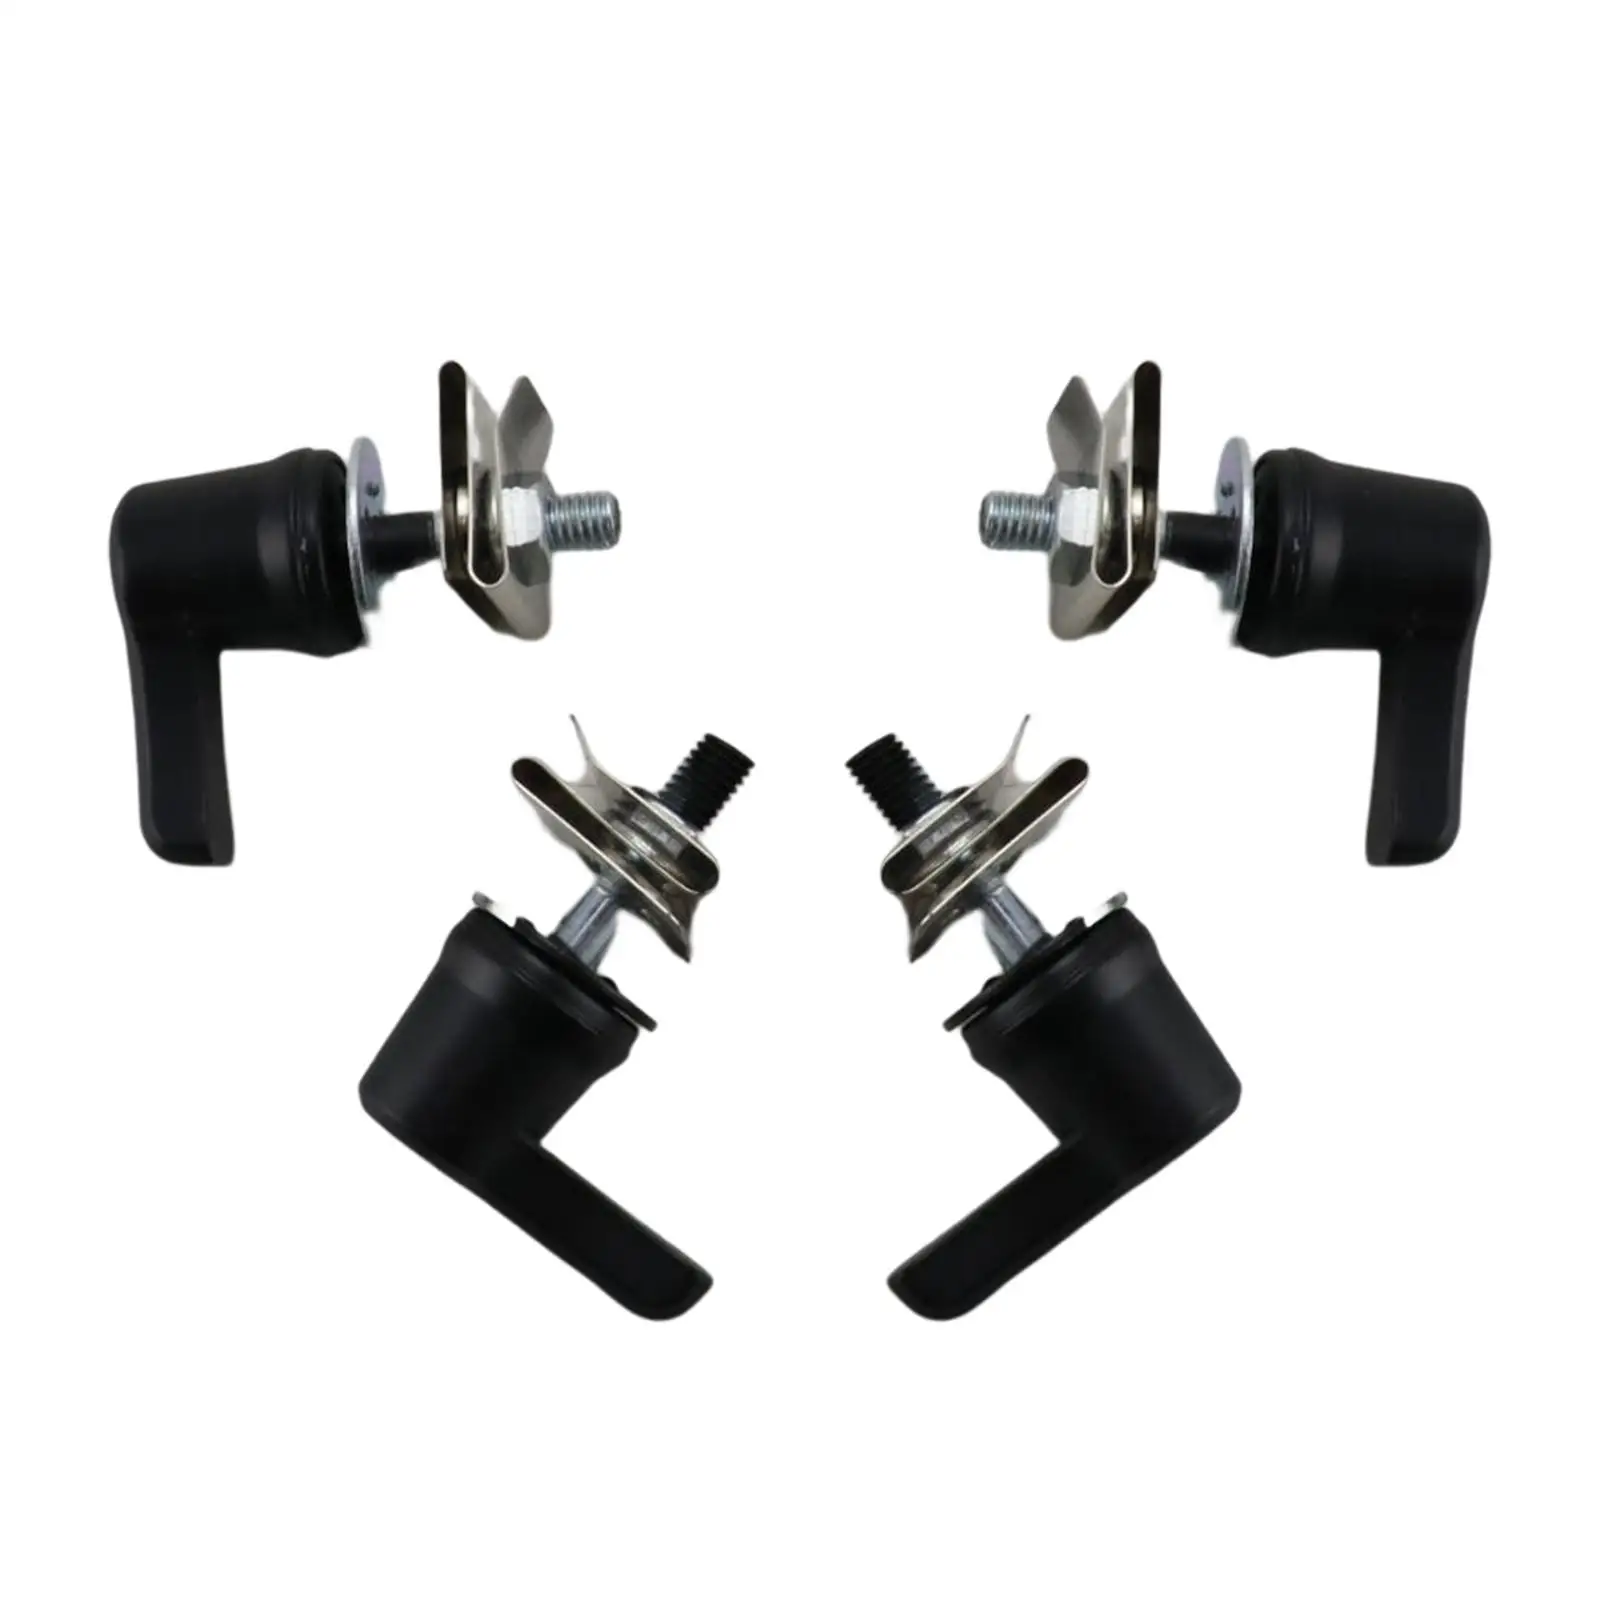 4Pcs 90201540 Saddlebag Mounting Hardware Replacement Bolt Screw Fastener for Touring Road Glide Motorbike Accessories